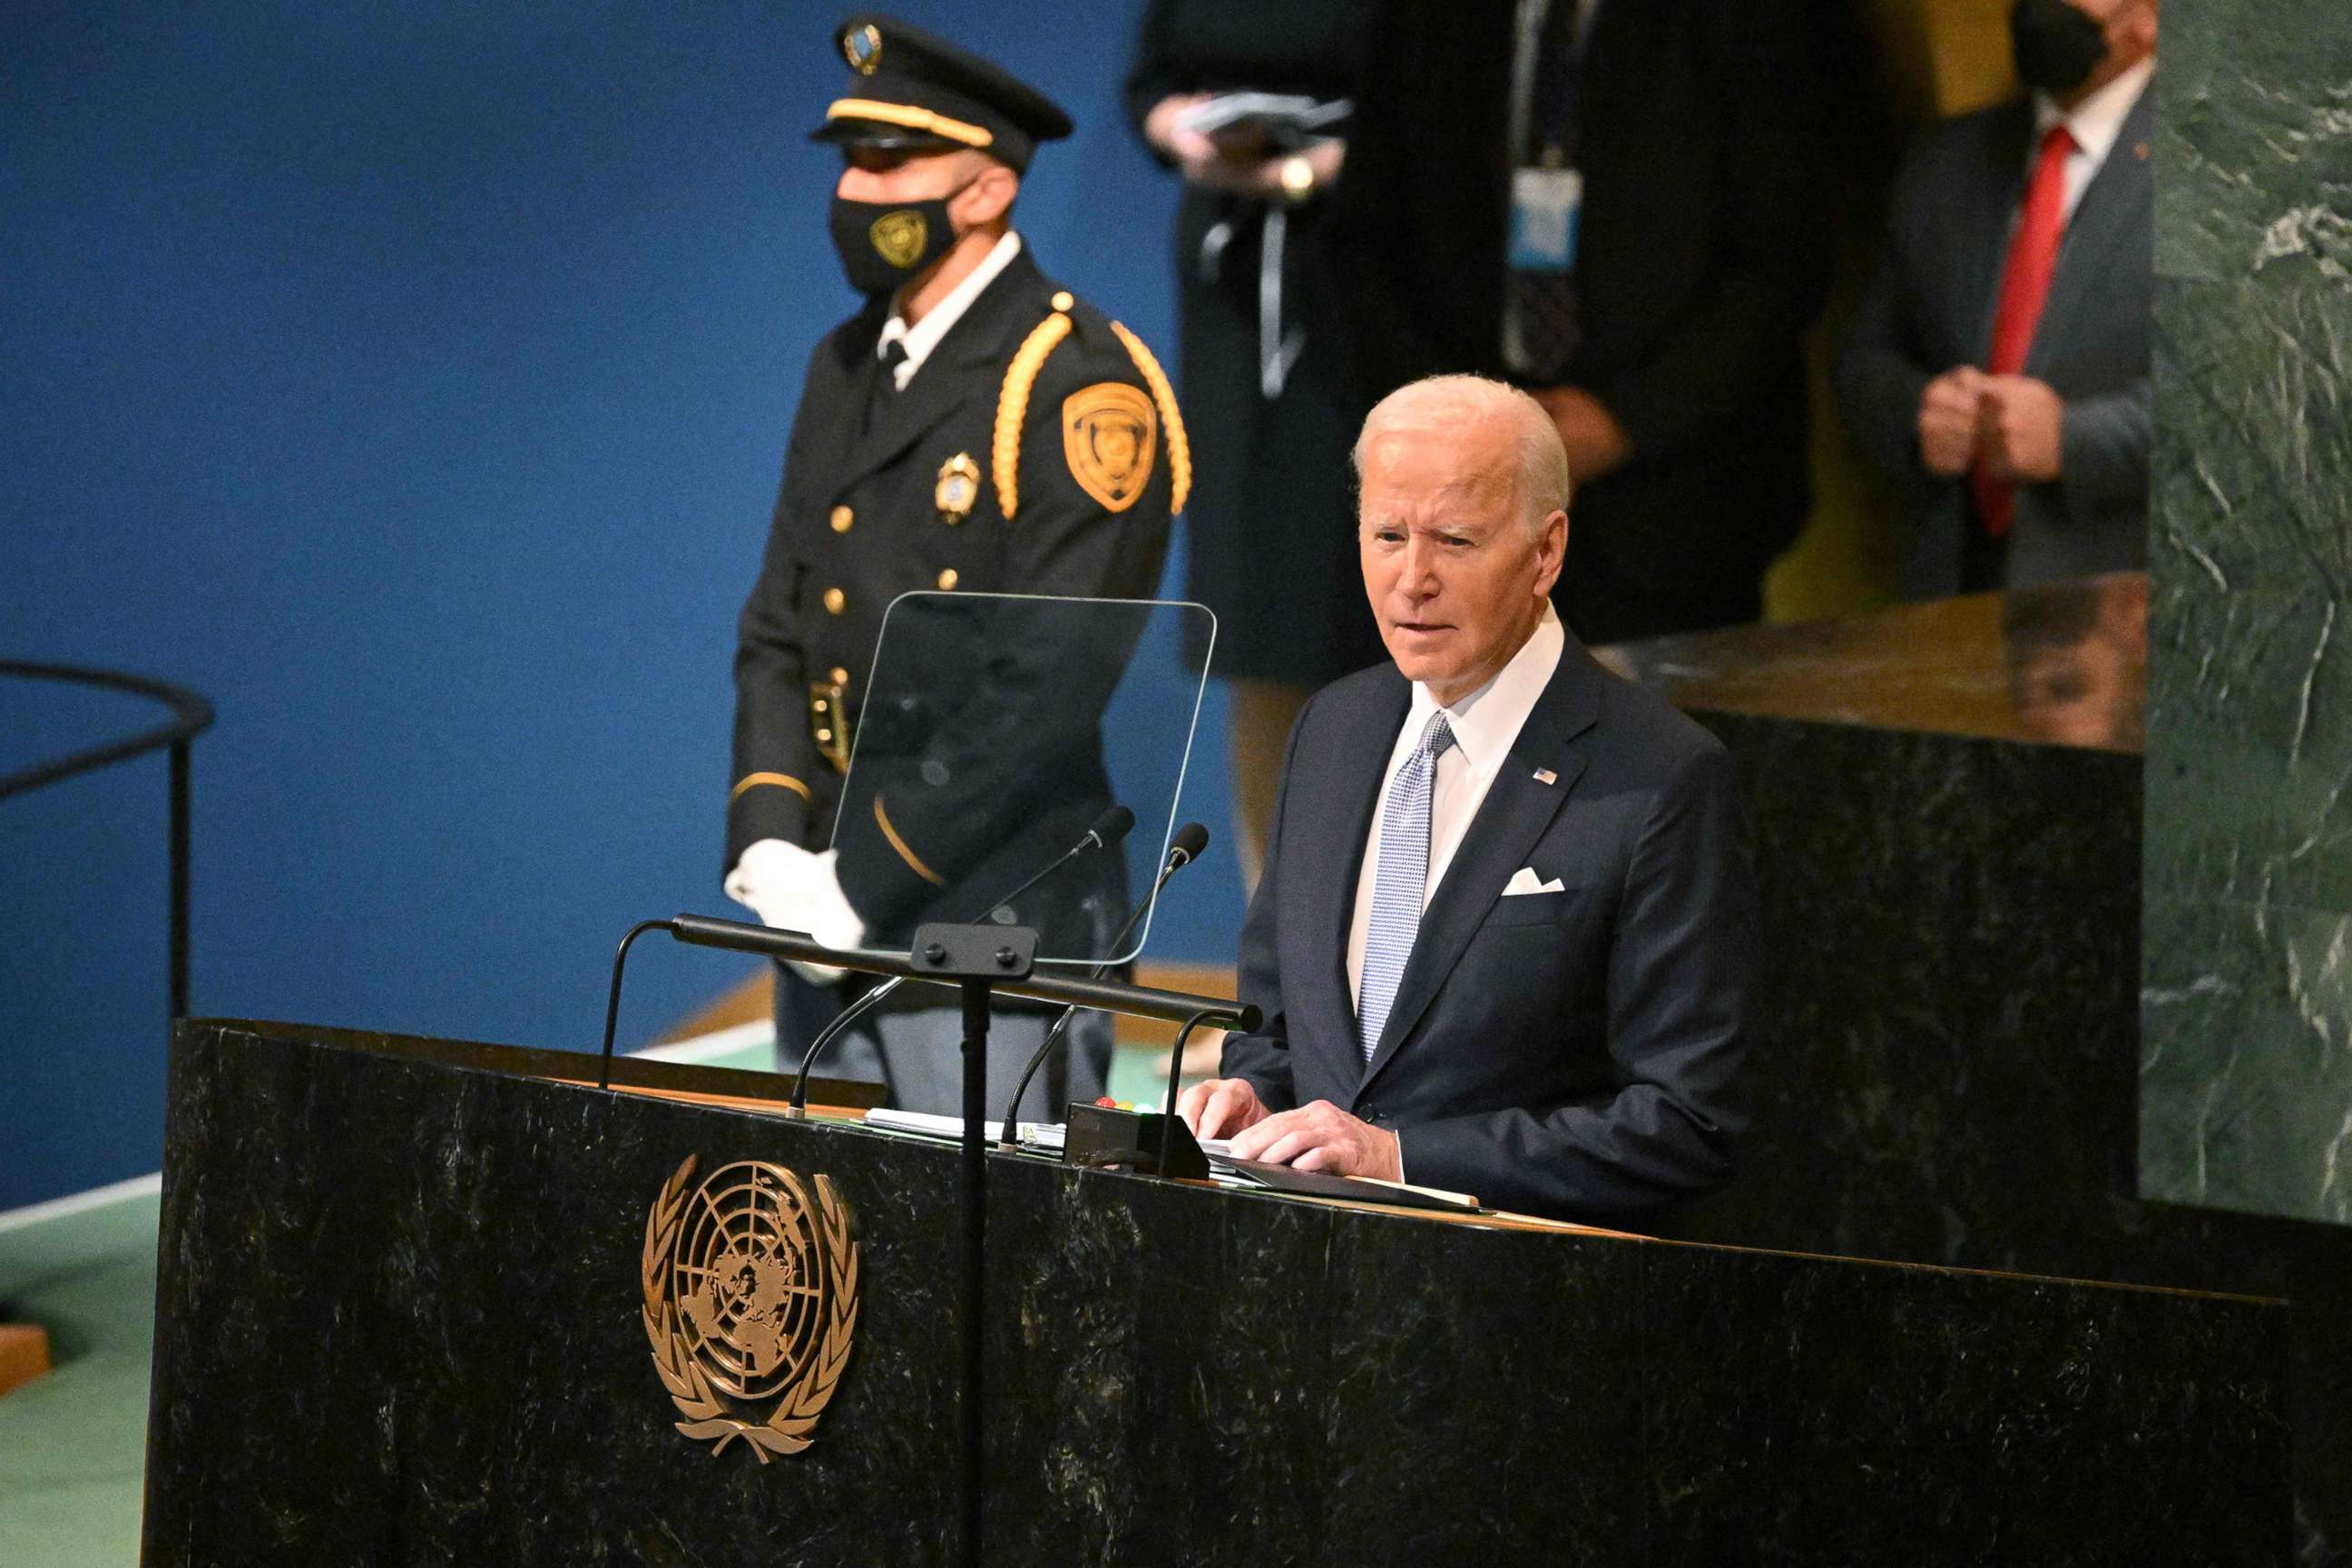 PHOTO: President Joe Biden addresses the 77th session of the United Nations General Assembly at the UN headquarters in New York City on Sept. 21, 2022.